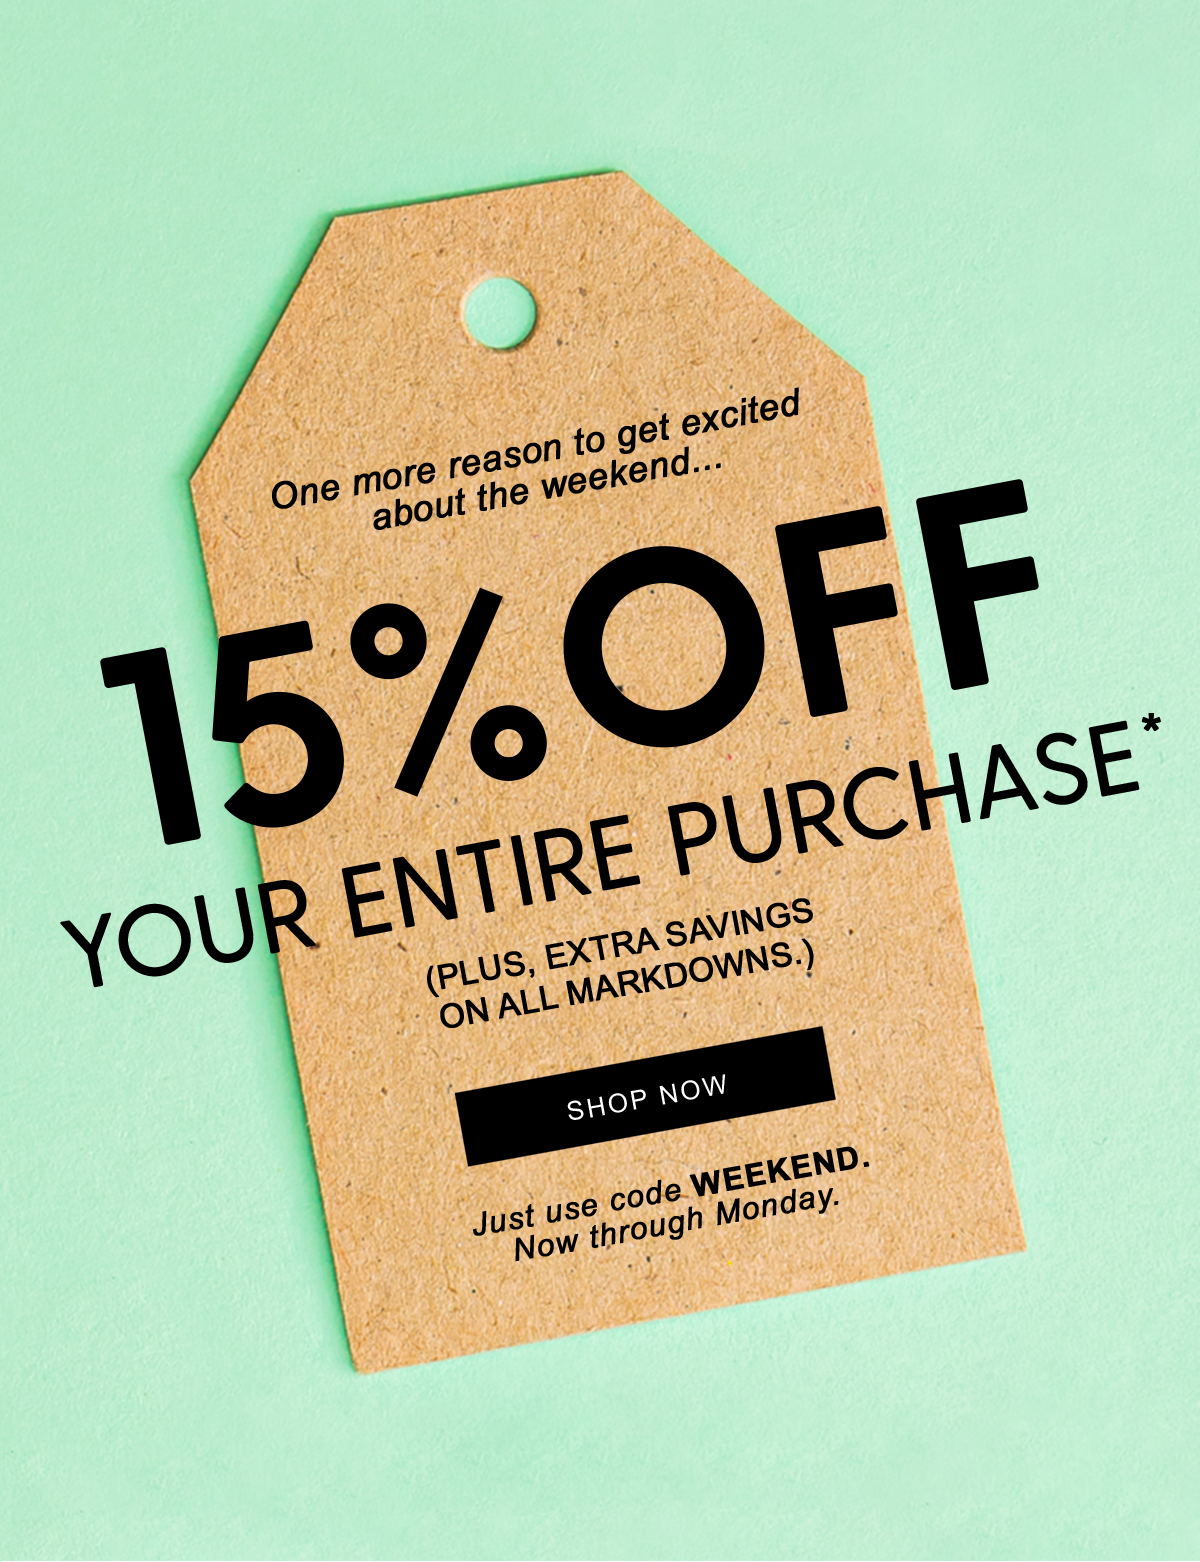 One more reason to get excited about the weekend...   15% off  Your Entire Purchase*  (Plus, extra savings on all markdowns.)  Shop Now   Just use code WEEKEND Now through Monday.